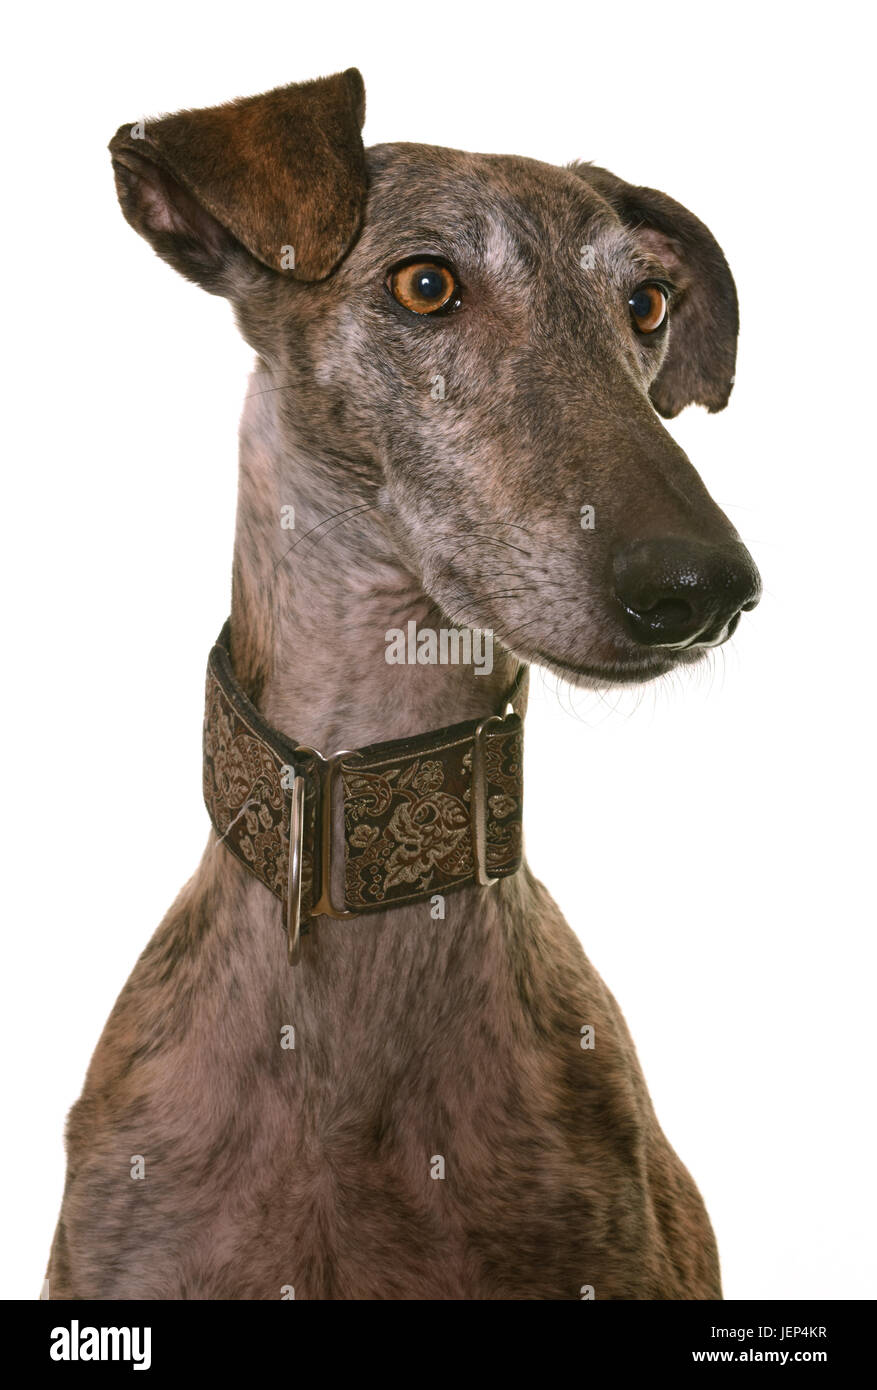 Galgo espanol in front of white background Banque D'Images